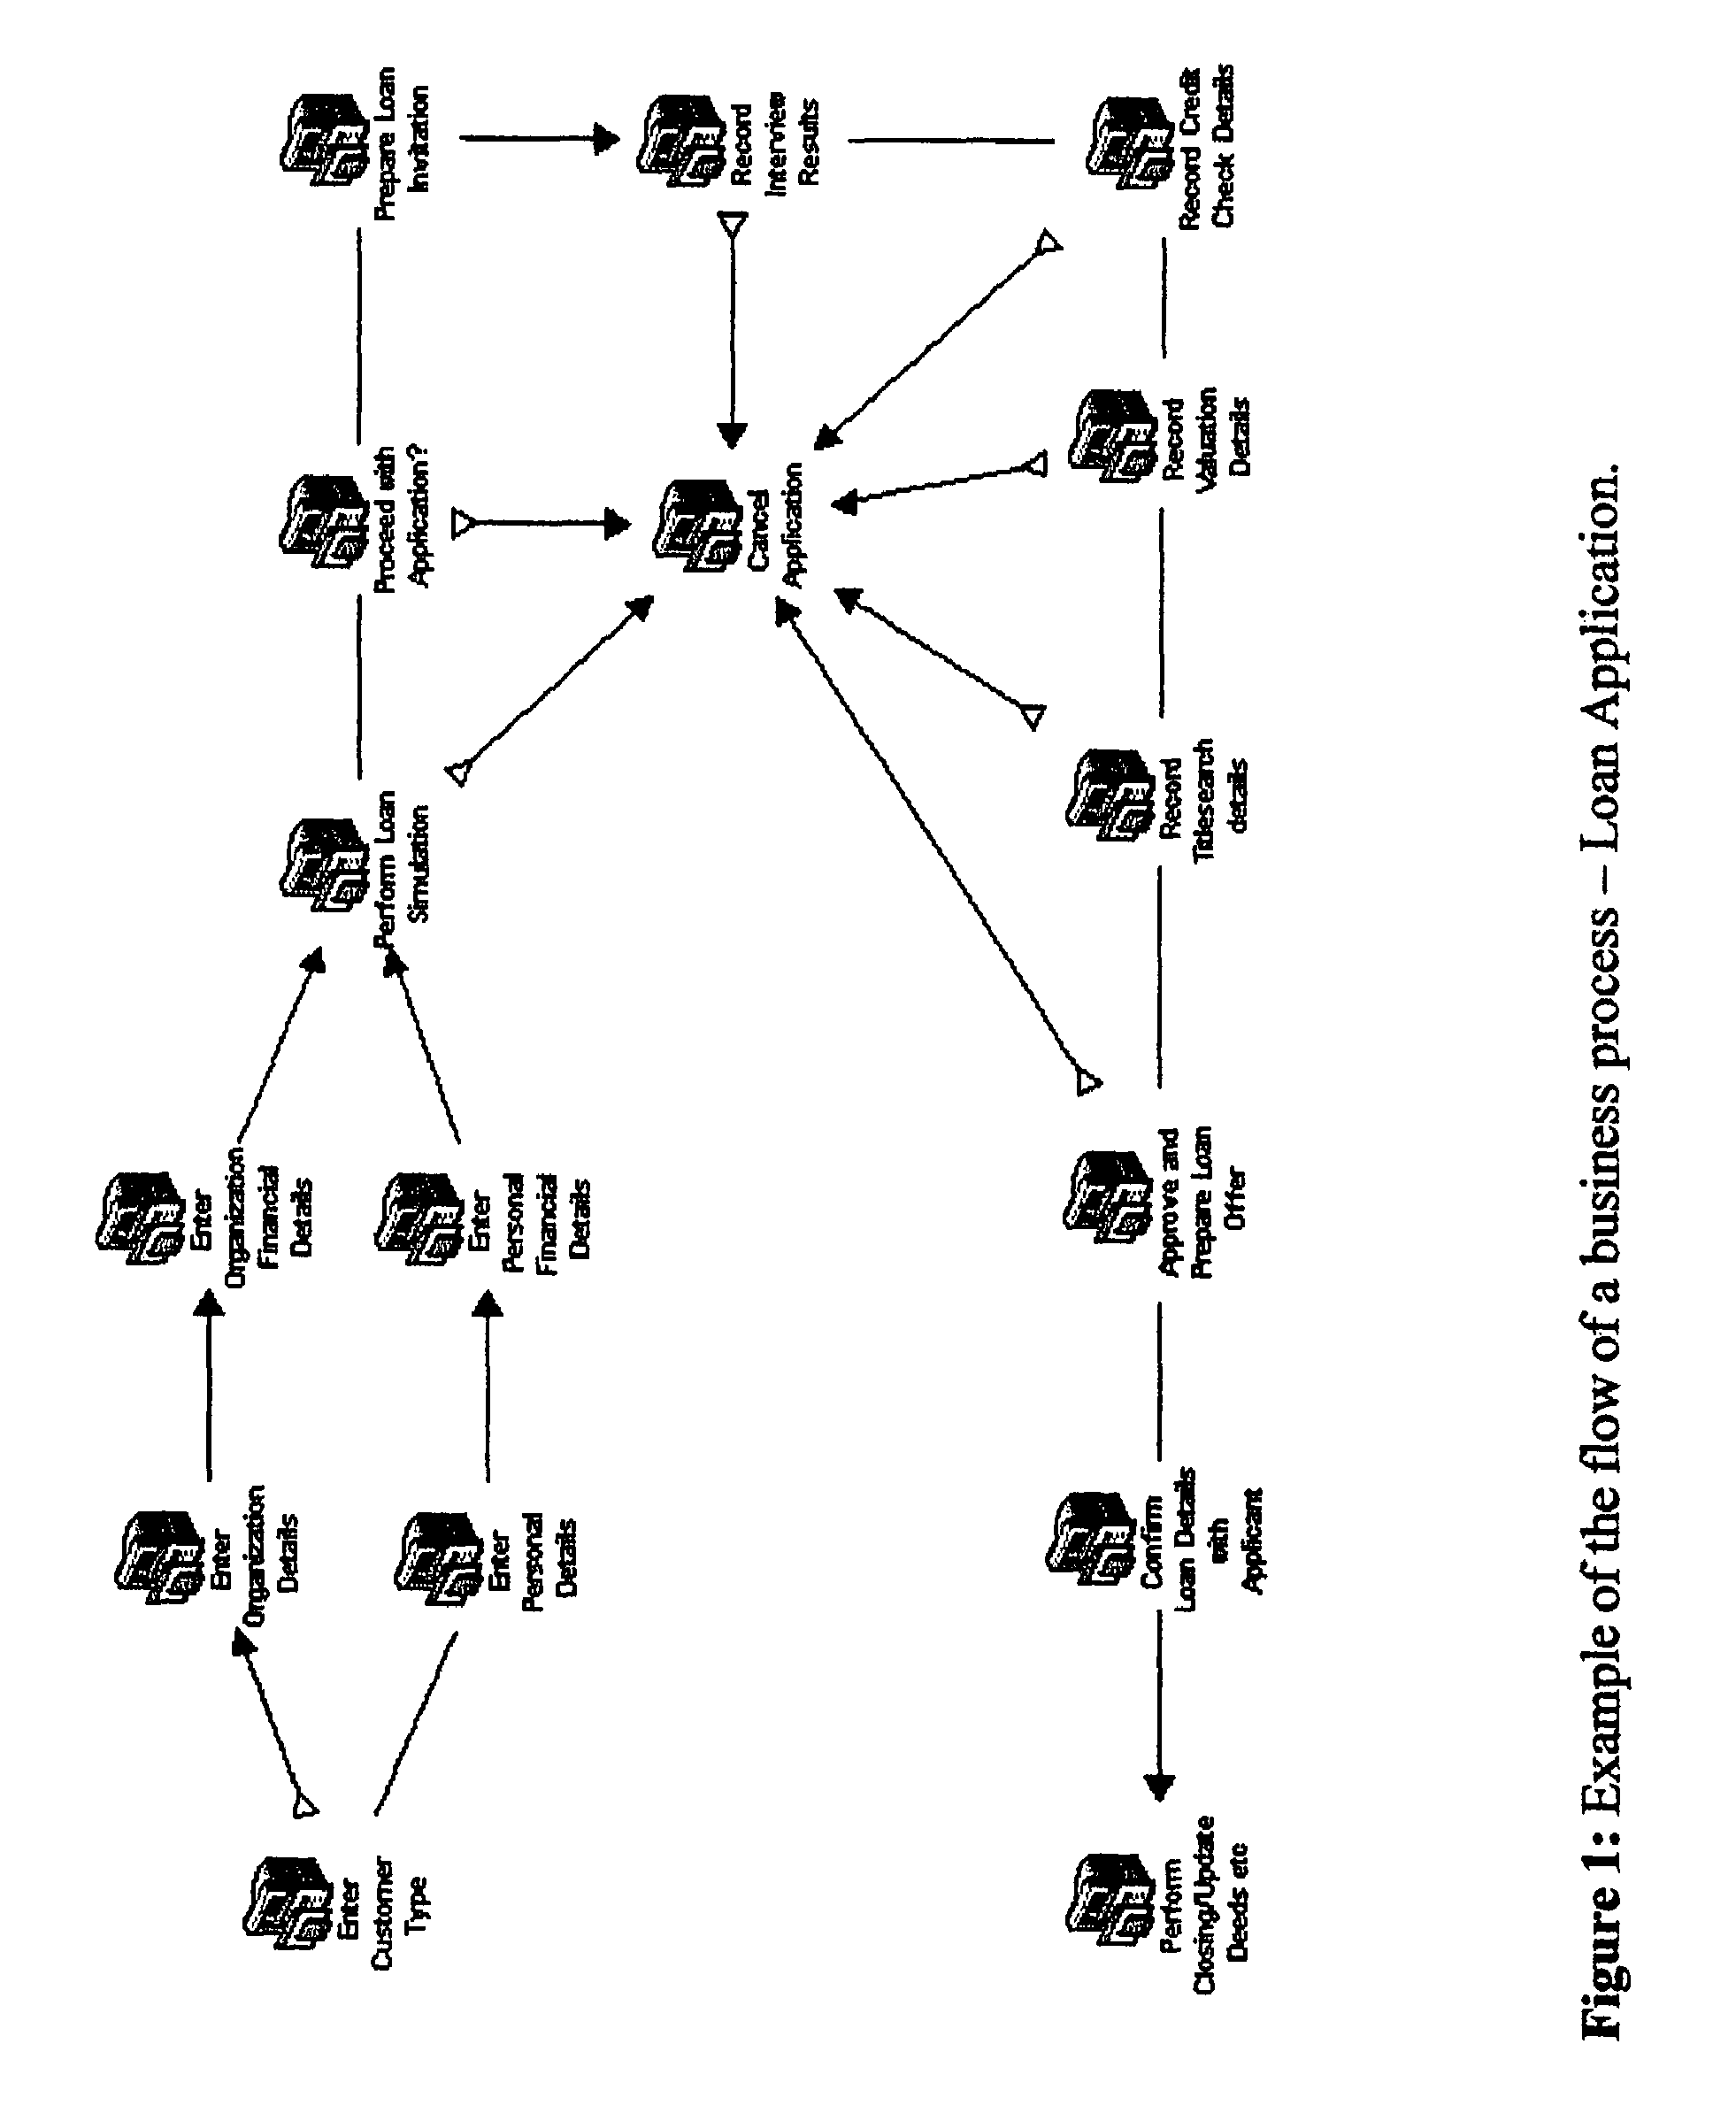 System and method for the composition, generation, integration and execution of business processes over a network